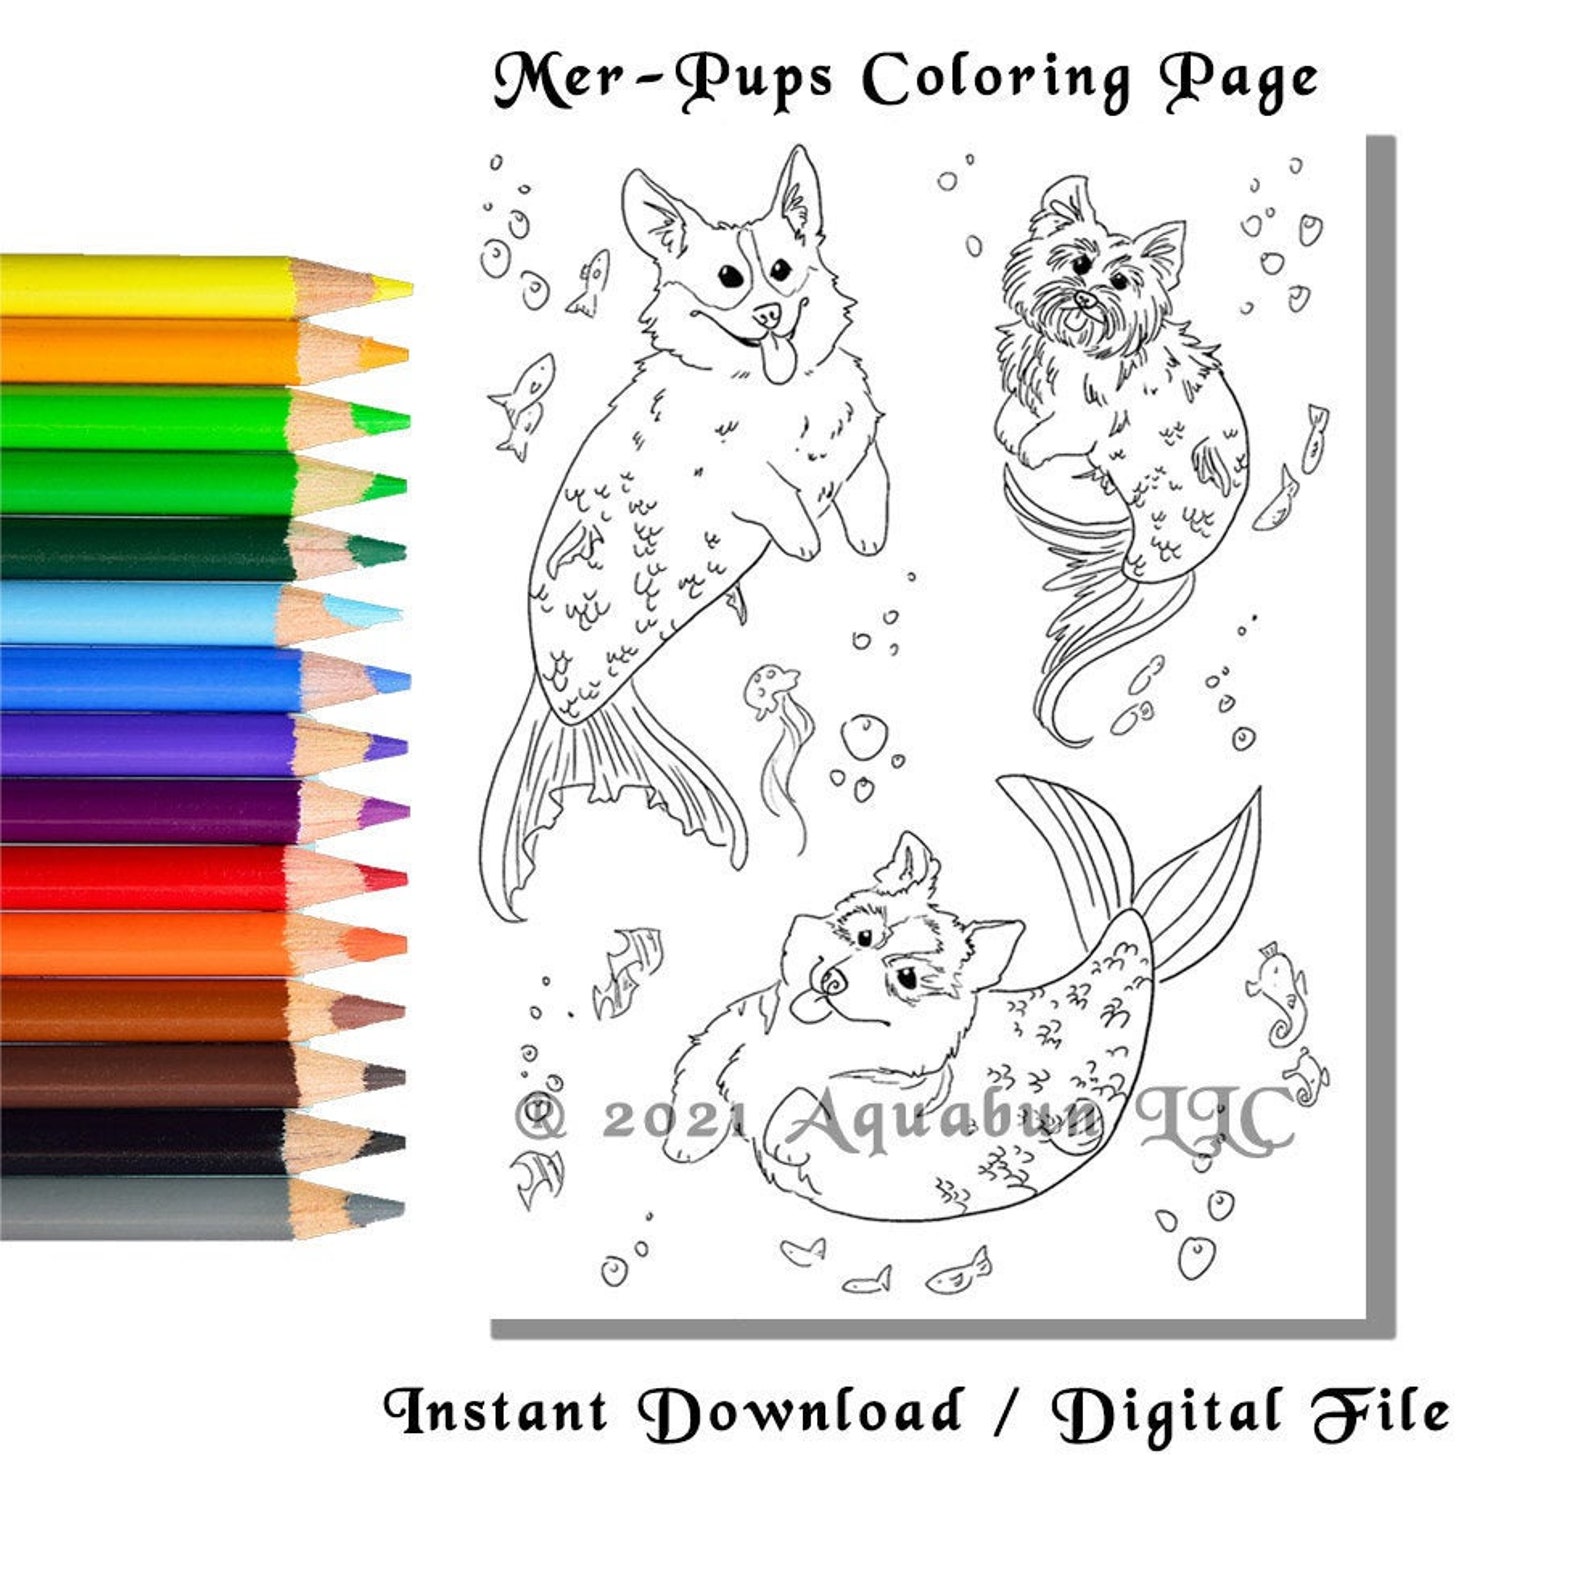 Mermaid Dogs Coloring Page INSTANT DOWNLOAD digital print | Etsy